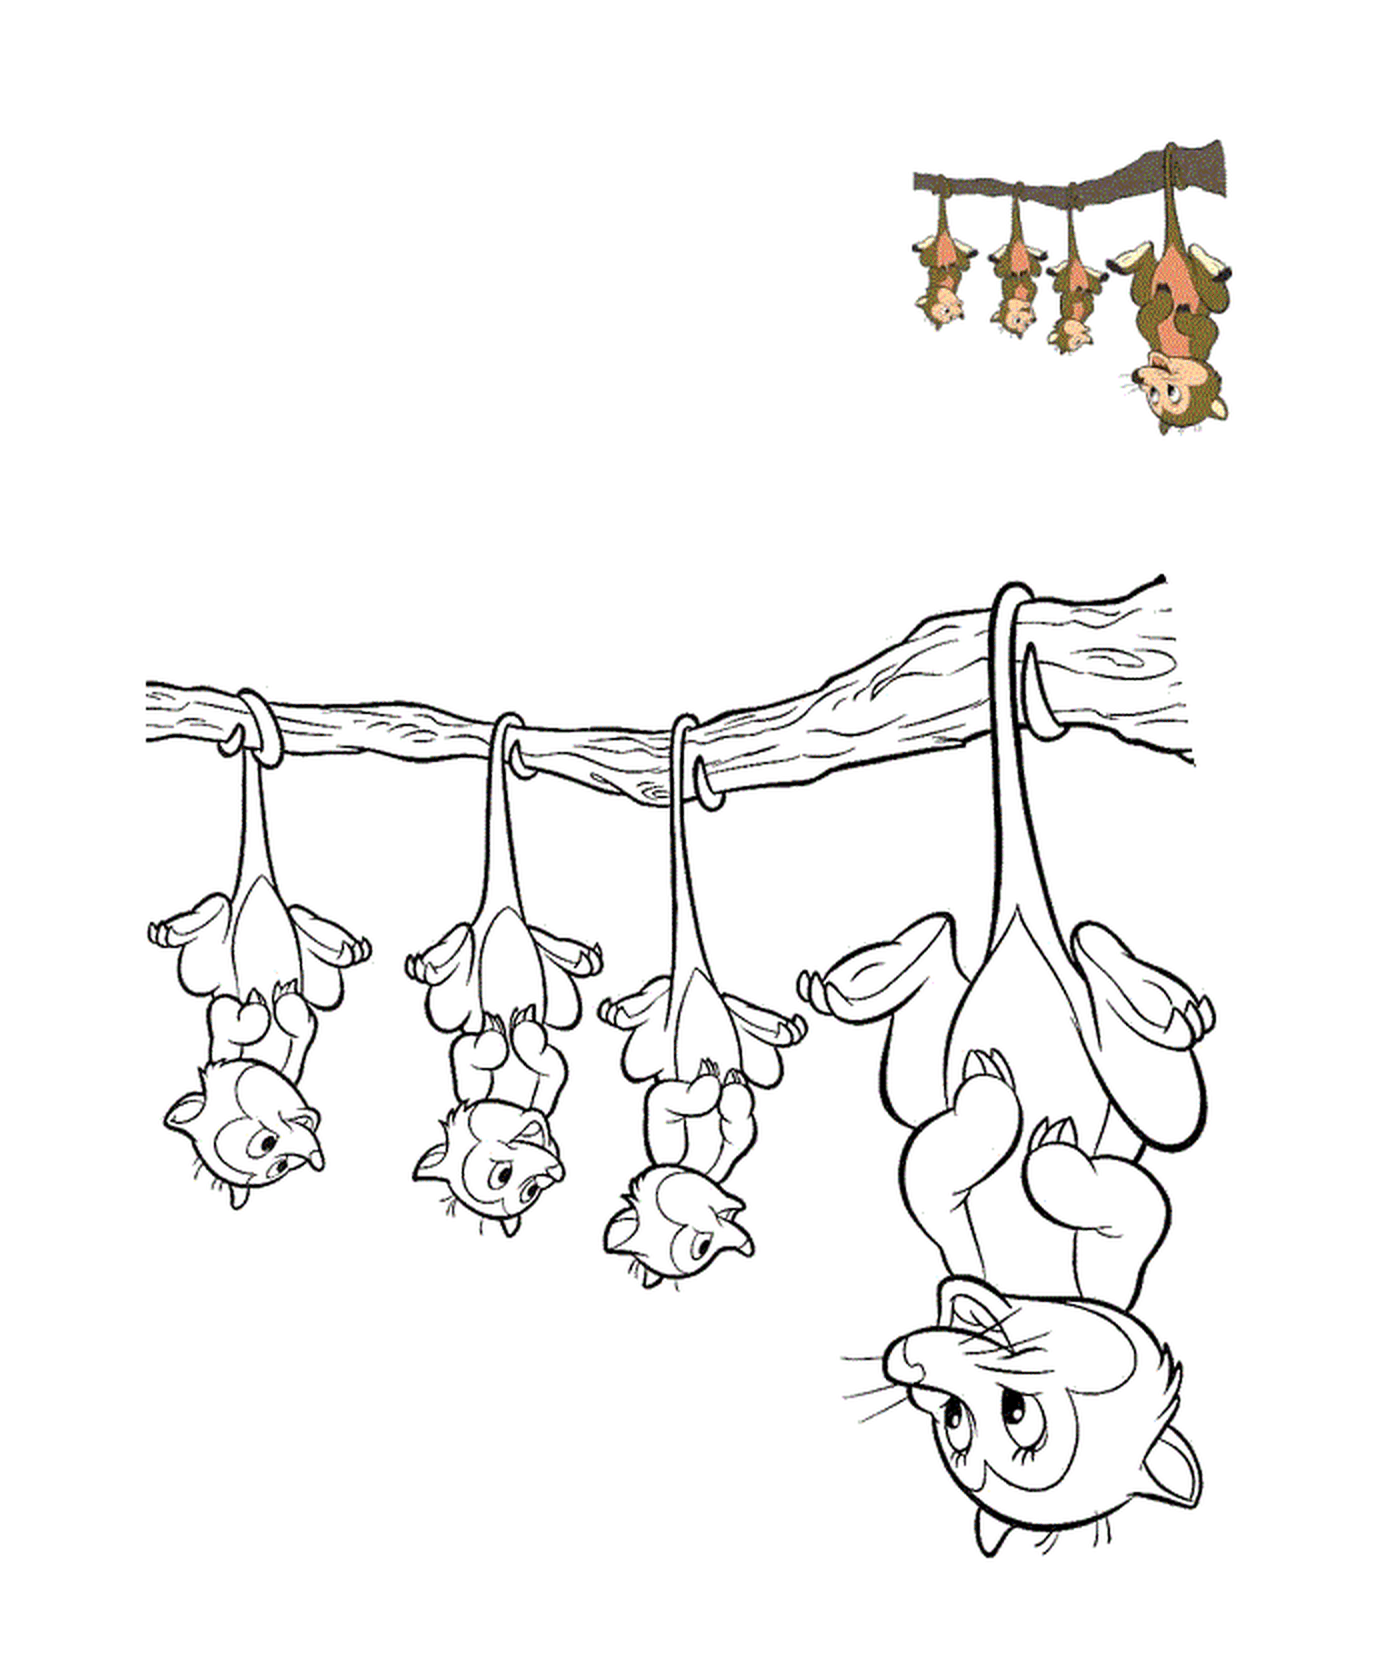  a group of bears hanging upside down on a tree branch 